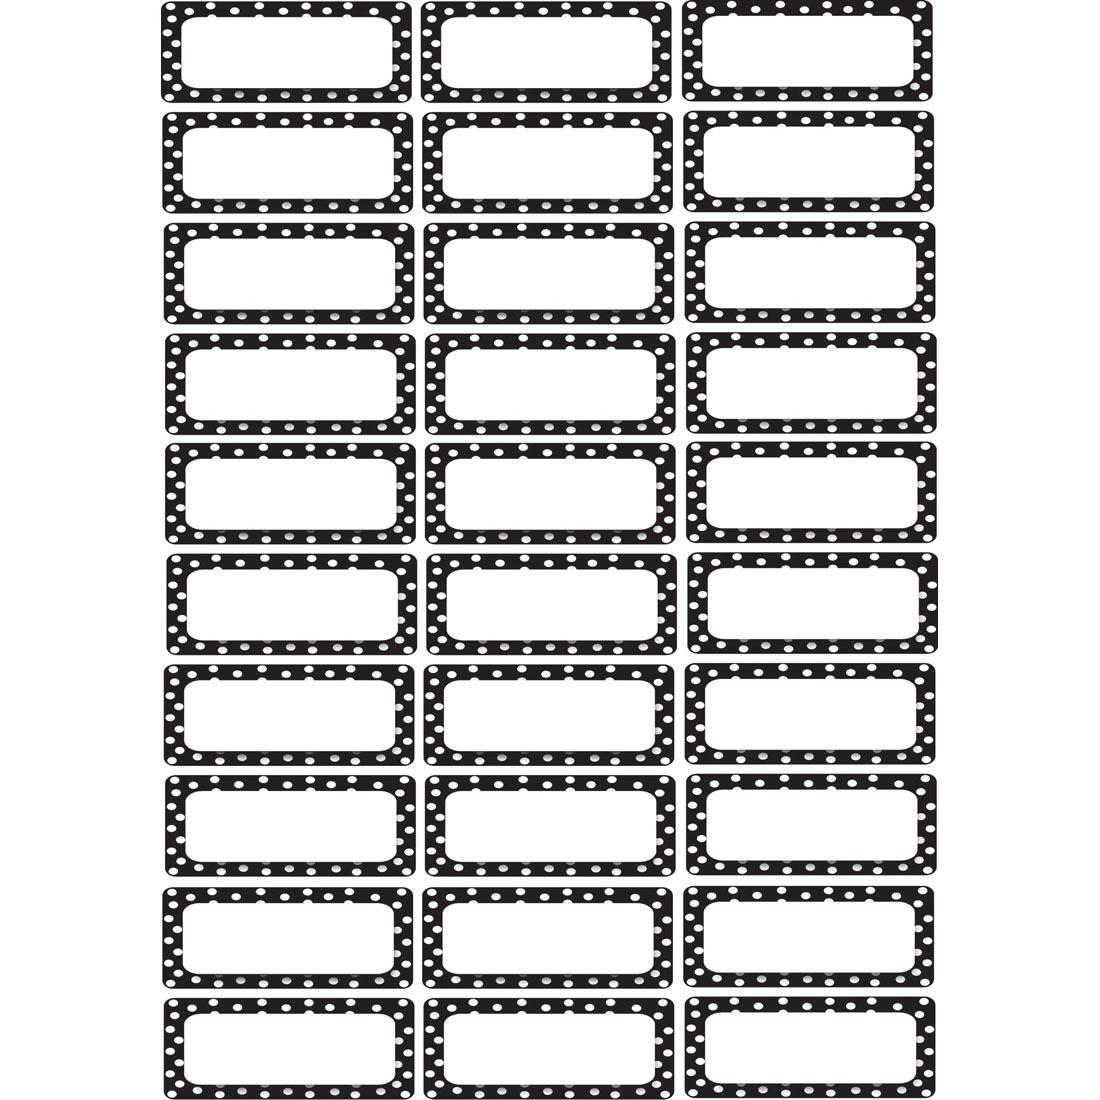 sheet of Small Magnetic Labels with Black & White Dots